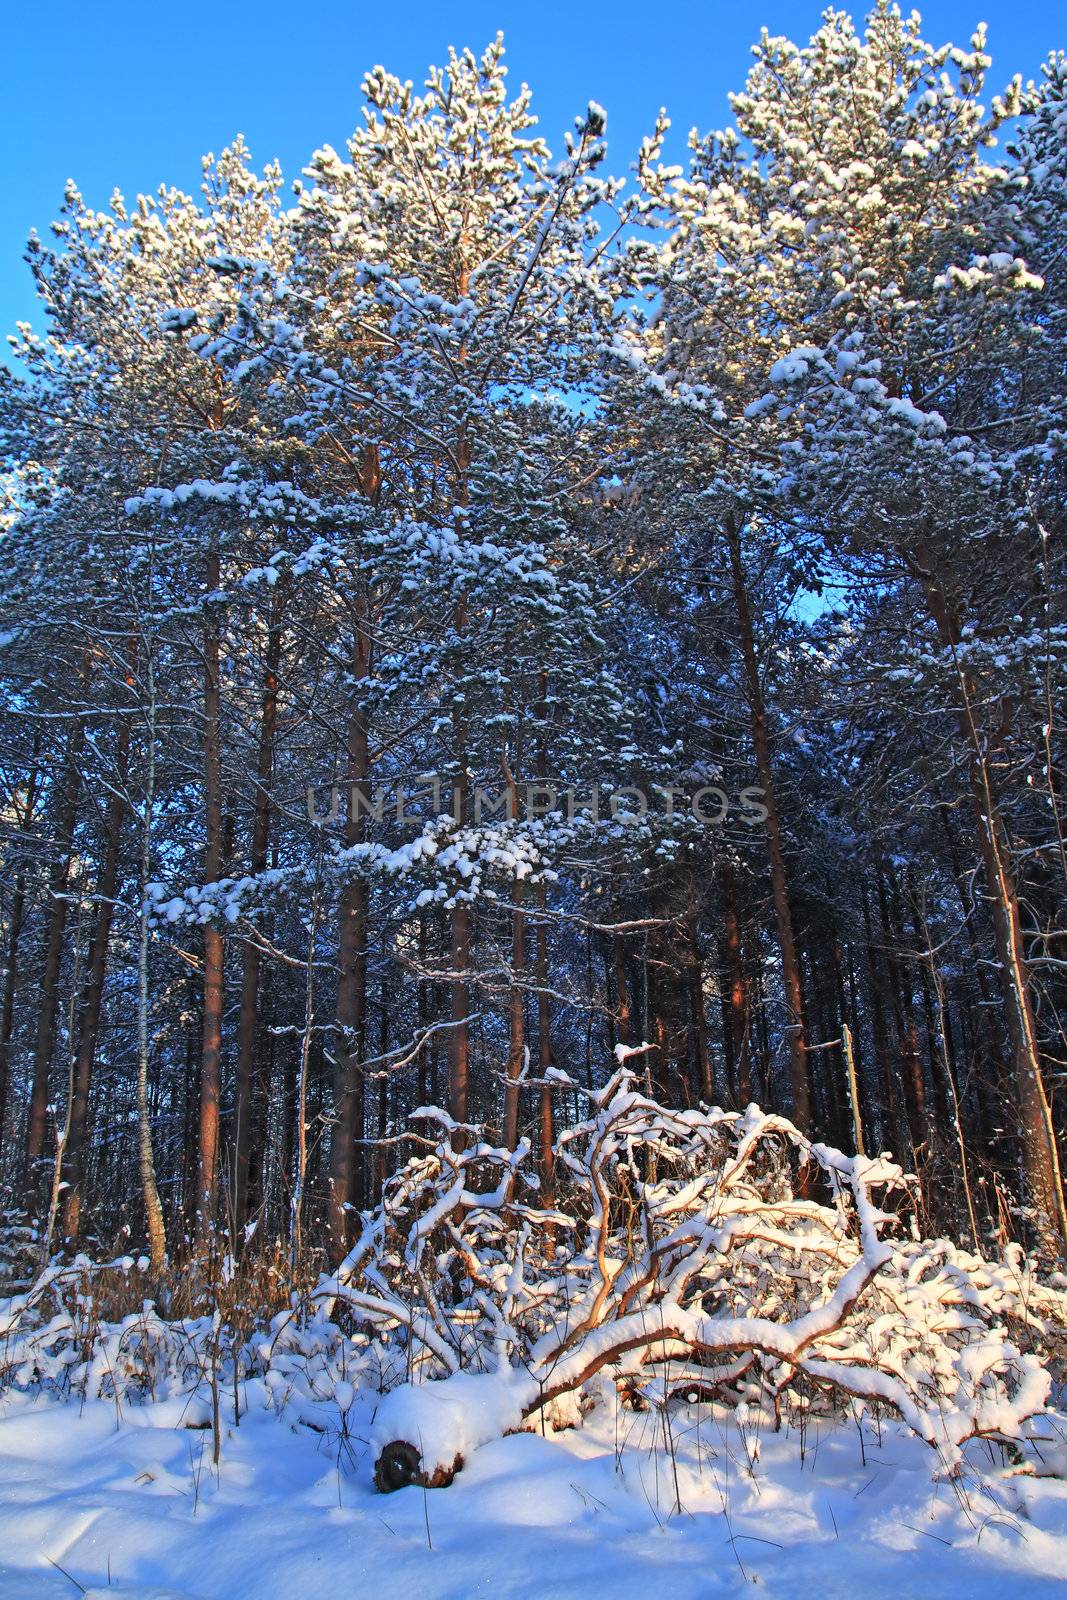 pine wood in winter snow by basel101658